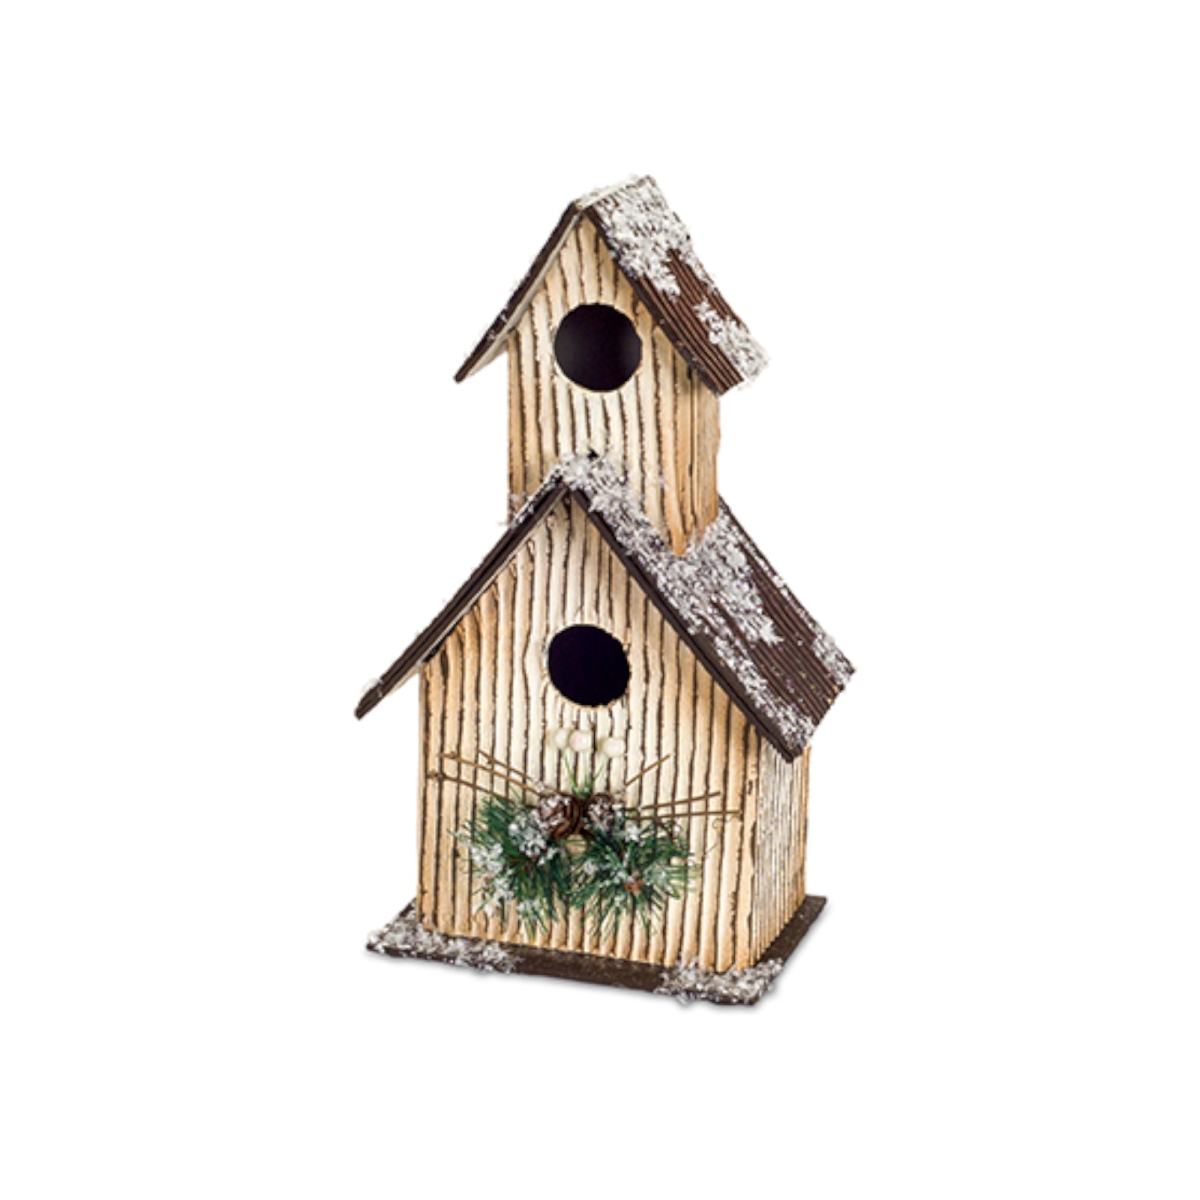 72902ds 12.5 In. Mdf Birdhouse, Brown & Green - Set Of 2